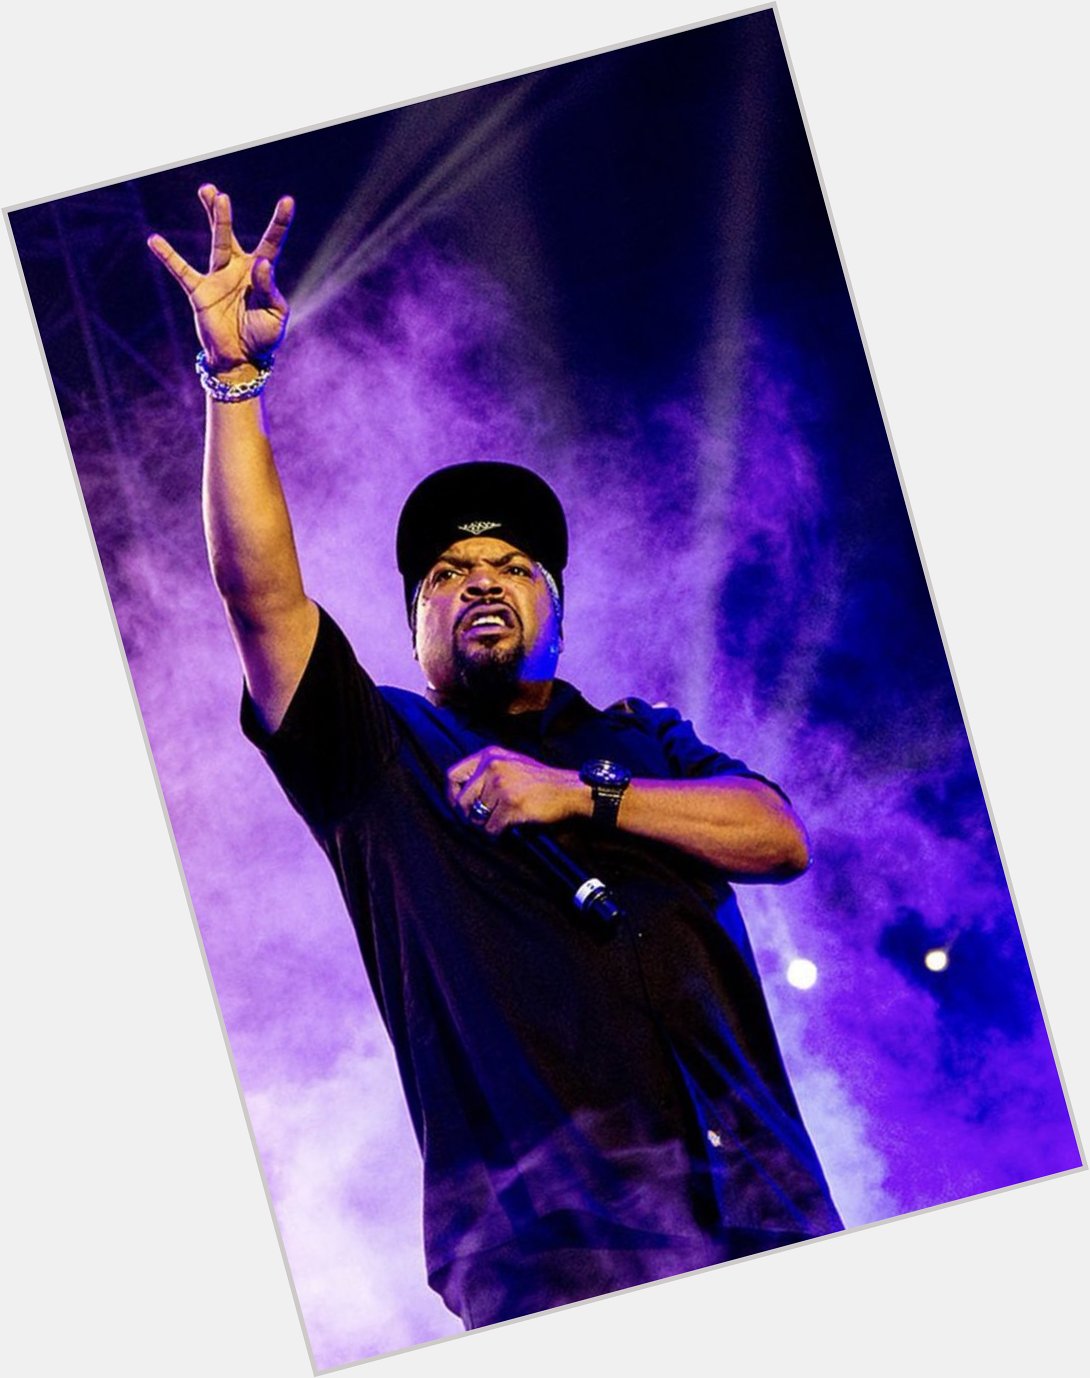 Happy Birthday to rapper and actor Ice Cube! 